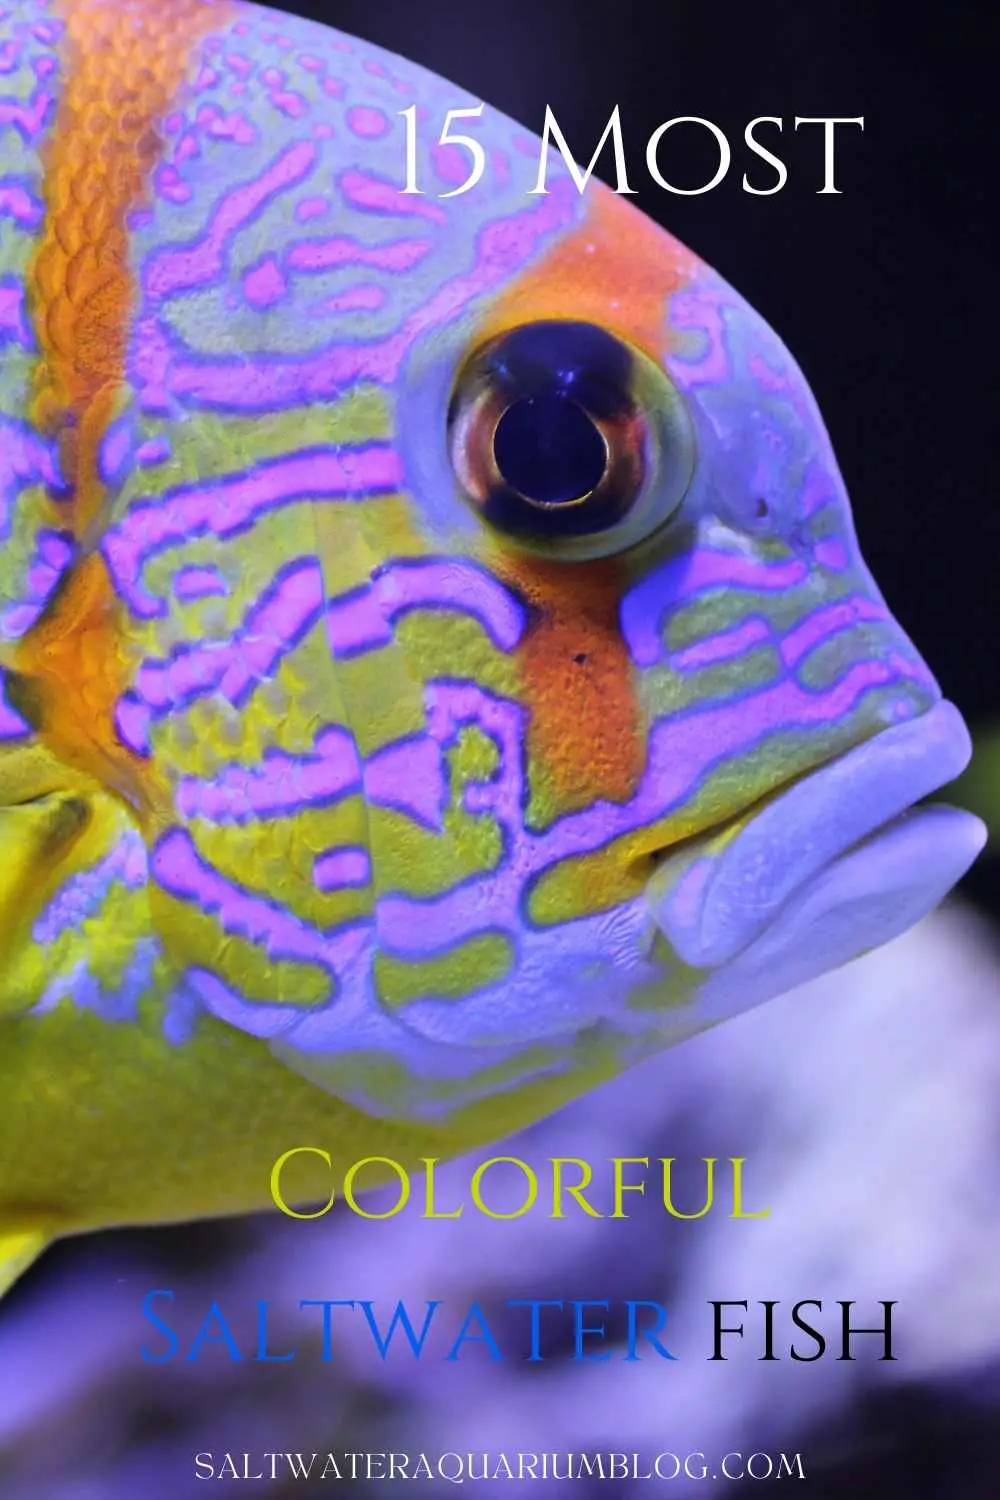 15 Most Colorful Saltwater Fish